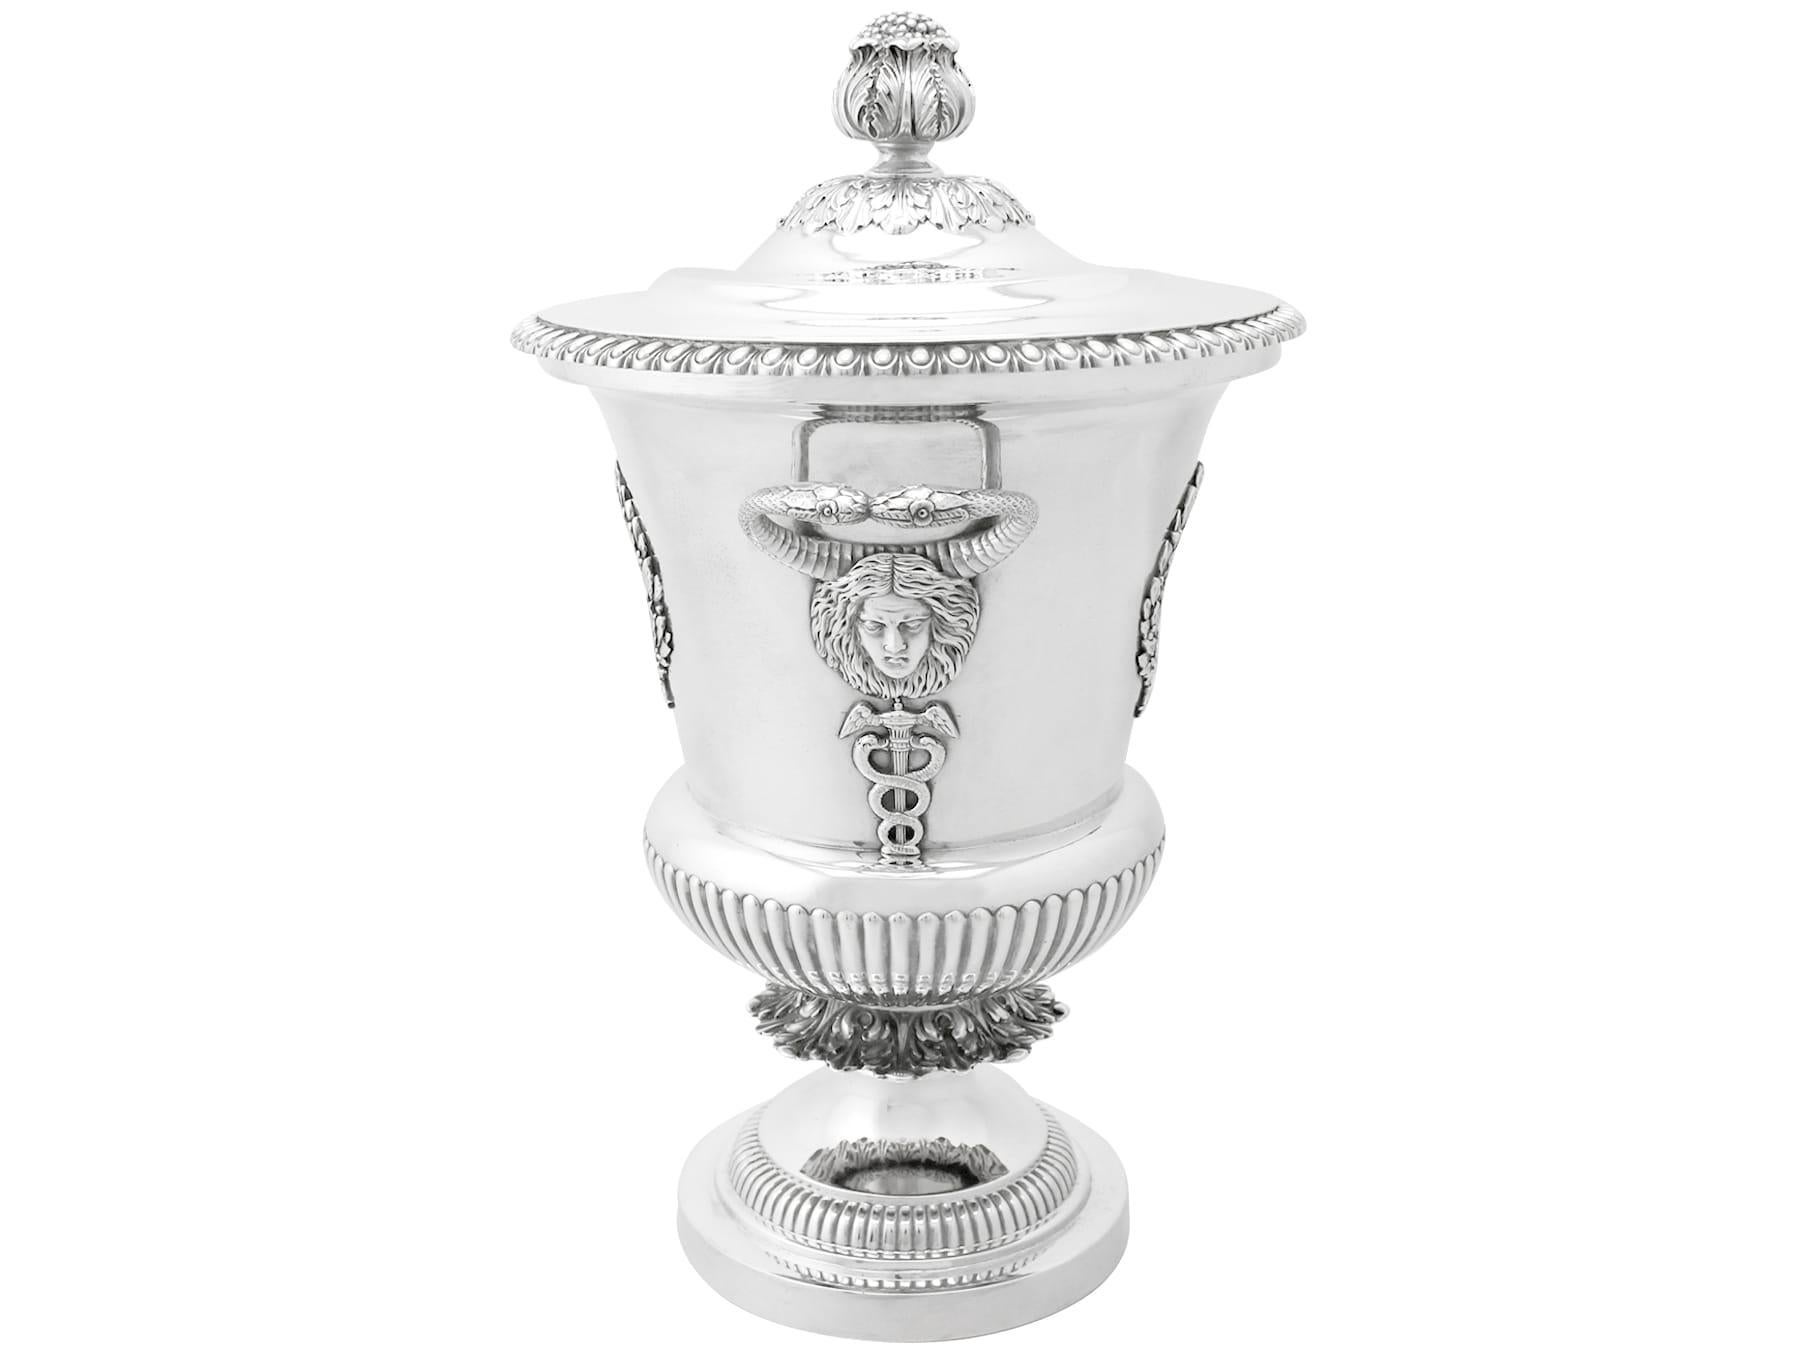 Antique Edwardian Sterling Silver Presentation Cup and Cover In Excellent Condition For Sale In Jesmond, Newcastle Upon Tyne